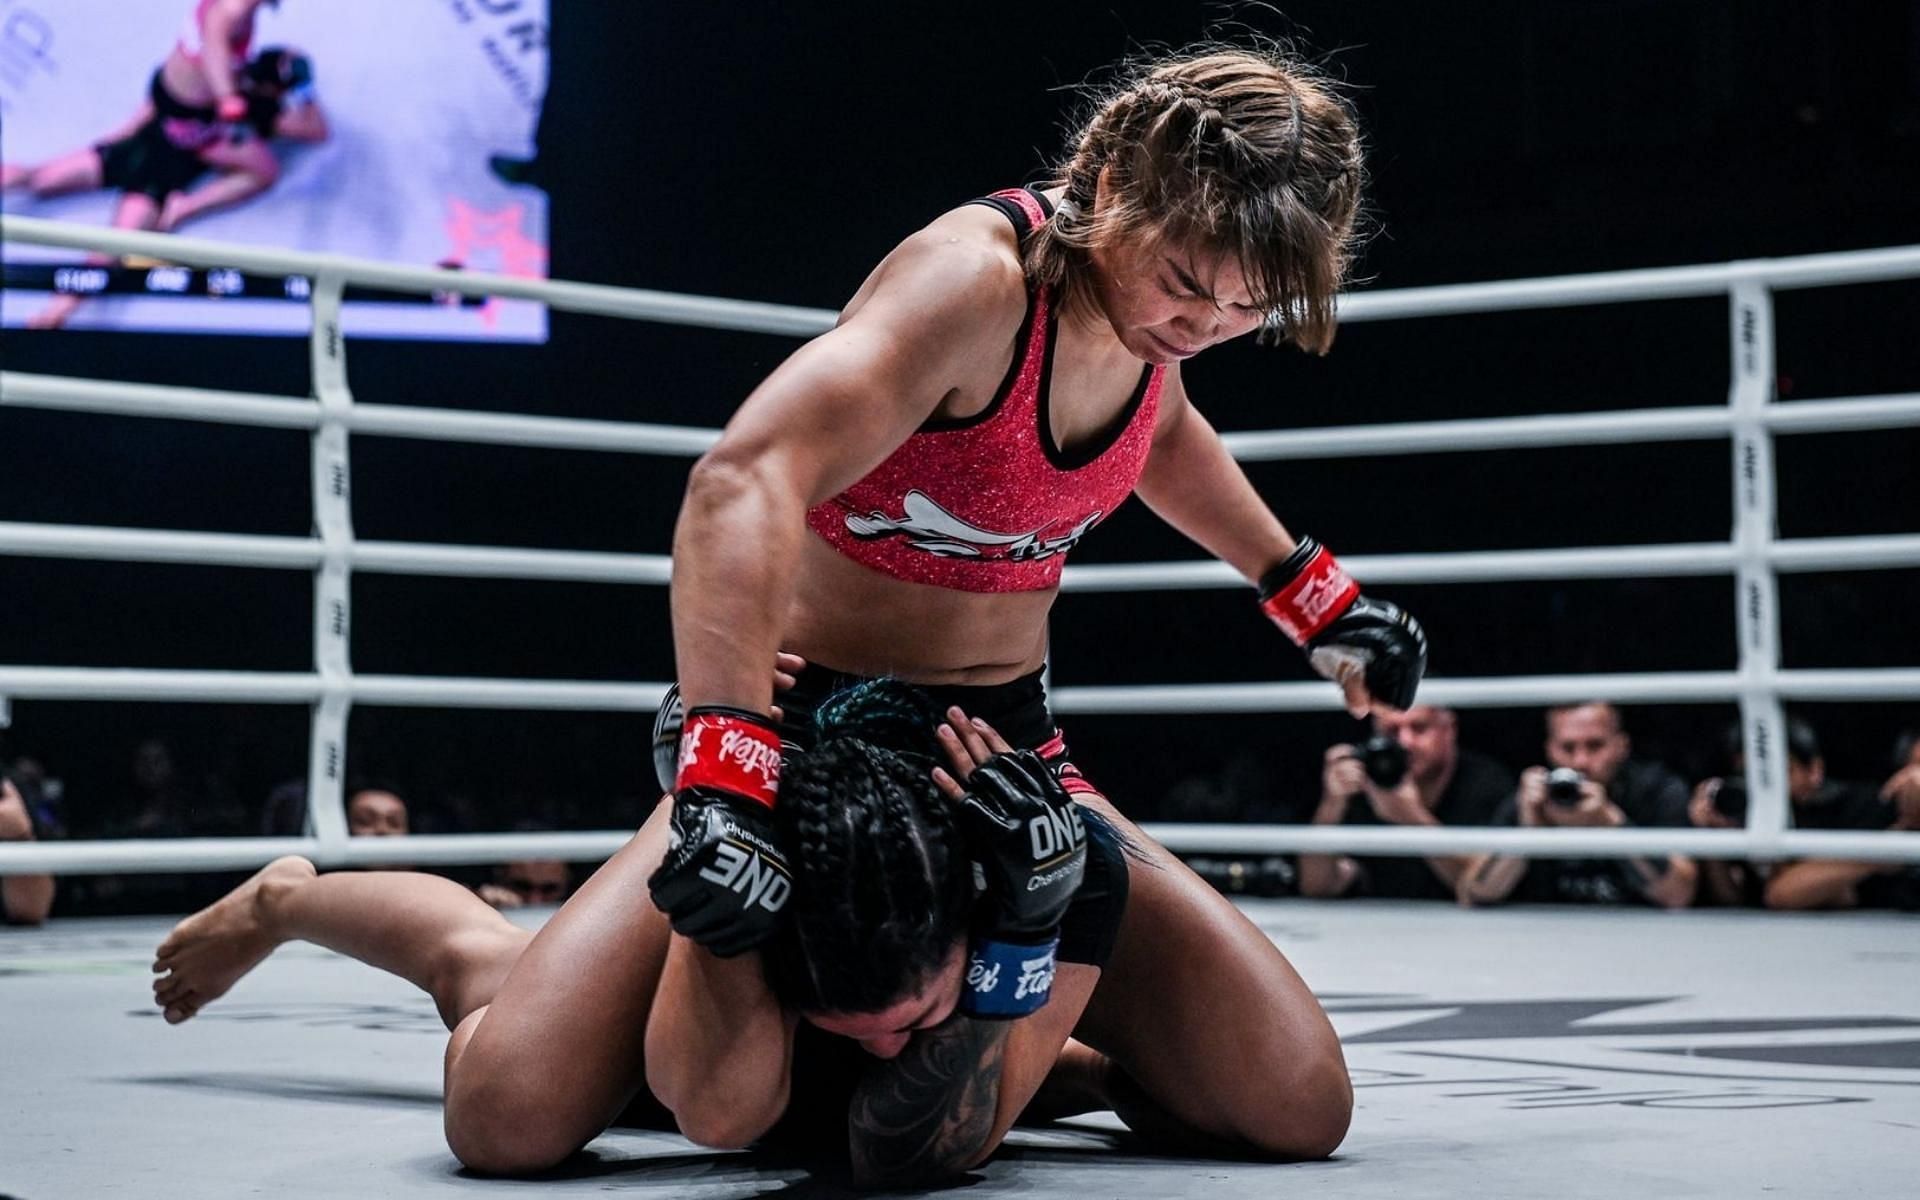 ONE Championship atomweight world Grand Prix champion Stamp Fairtex (top) might see gold around her waist in 2022. (Image courtesy of ONE Championship)